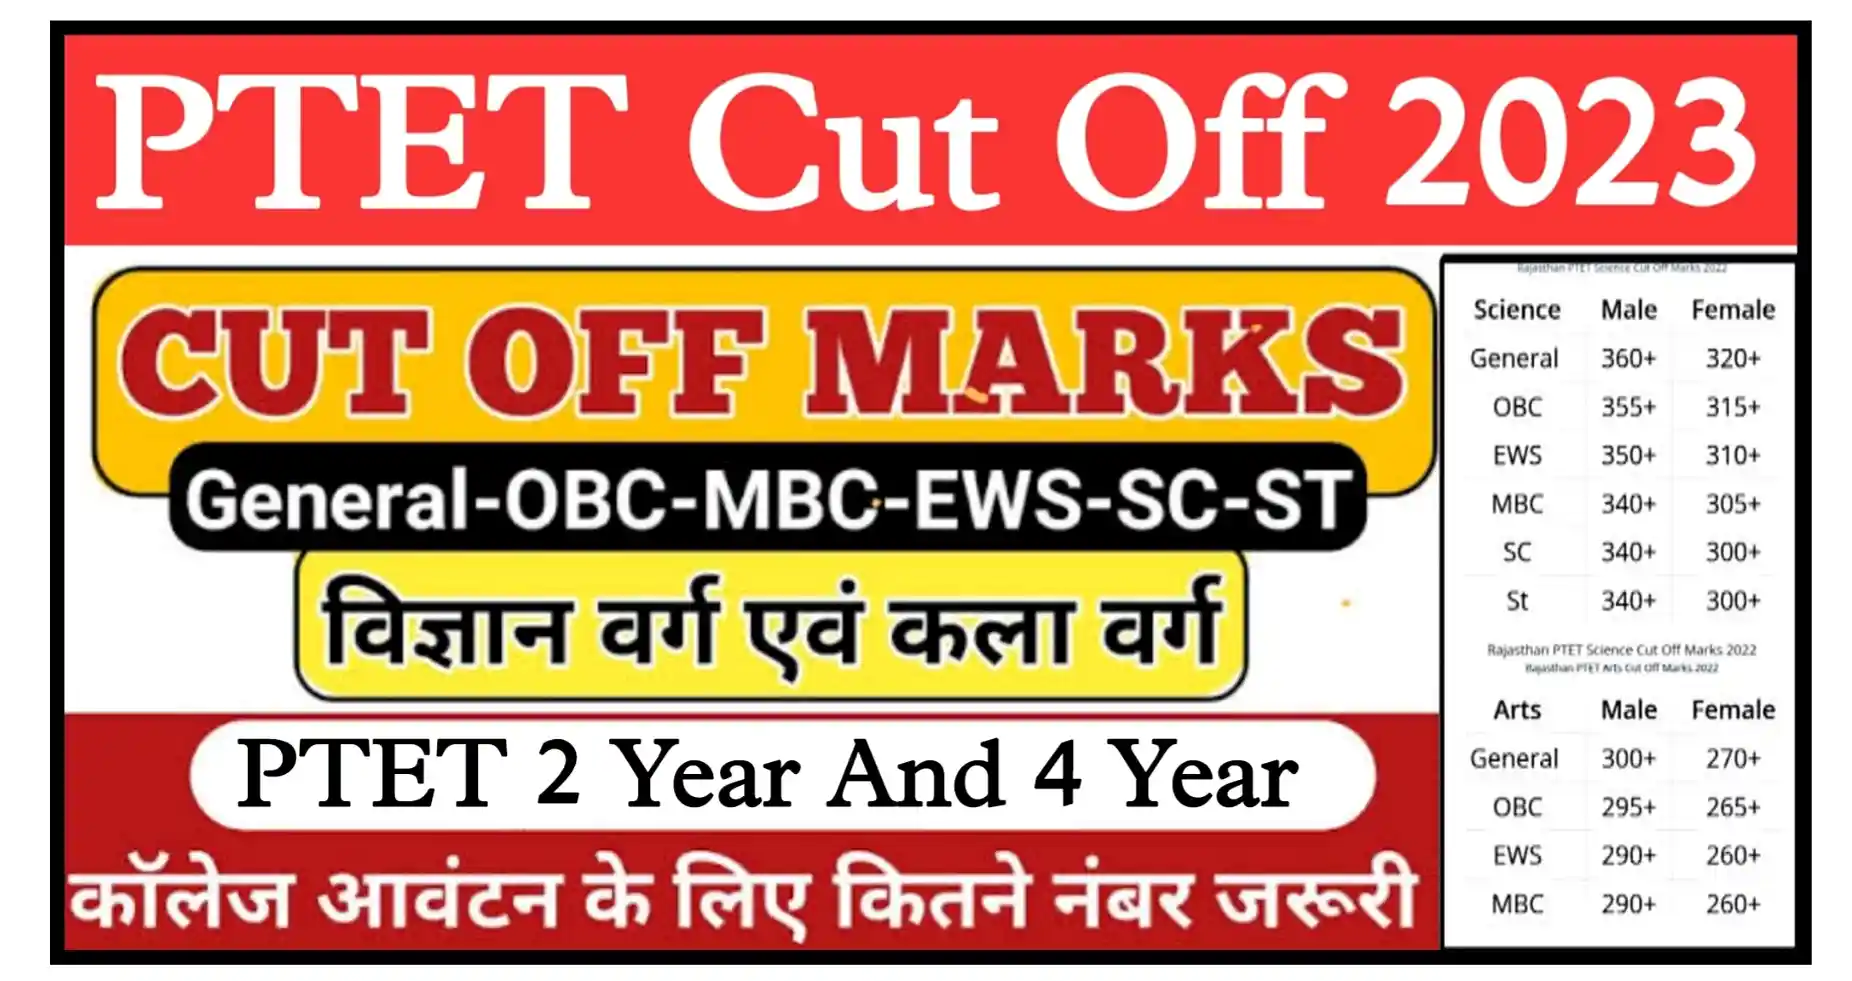 Rajasthan PTET Cut Off 2023 Check Link PTET 2 Year Cut off And PTET 4 Year Cut off Category Wise